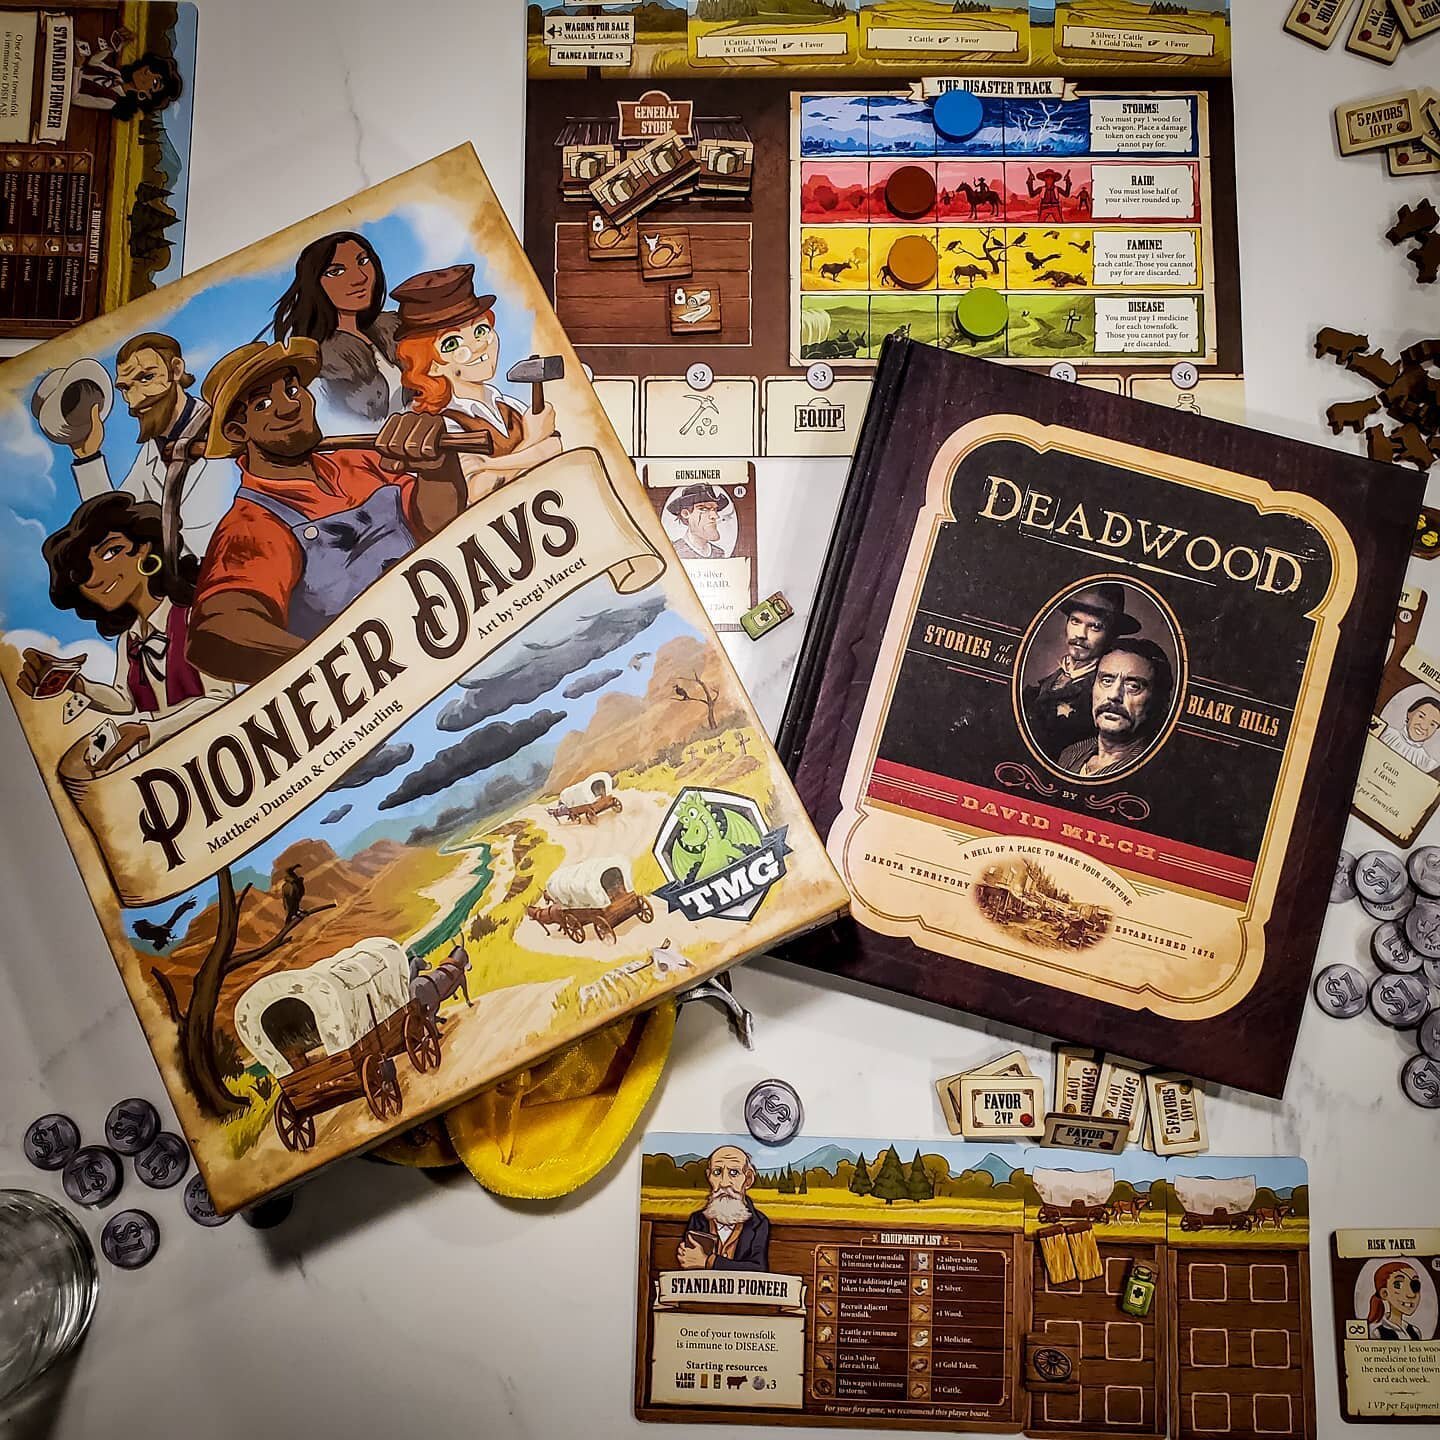 Last week we played Pioneer Days. It was a fun game that we all enjoyed. Jordan figured out a very overpowered mechanic early on and wiped the floor with us. I paired it with a companion book from one of my all time favorite TV series, Deadwood. The 